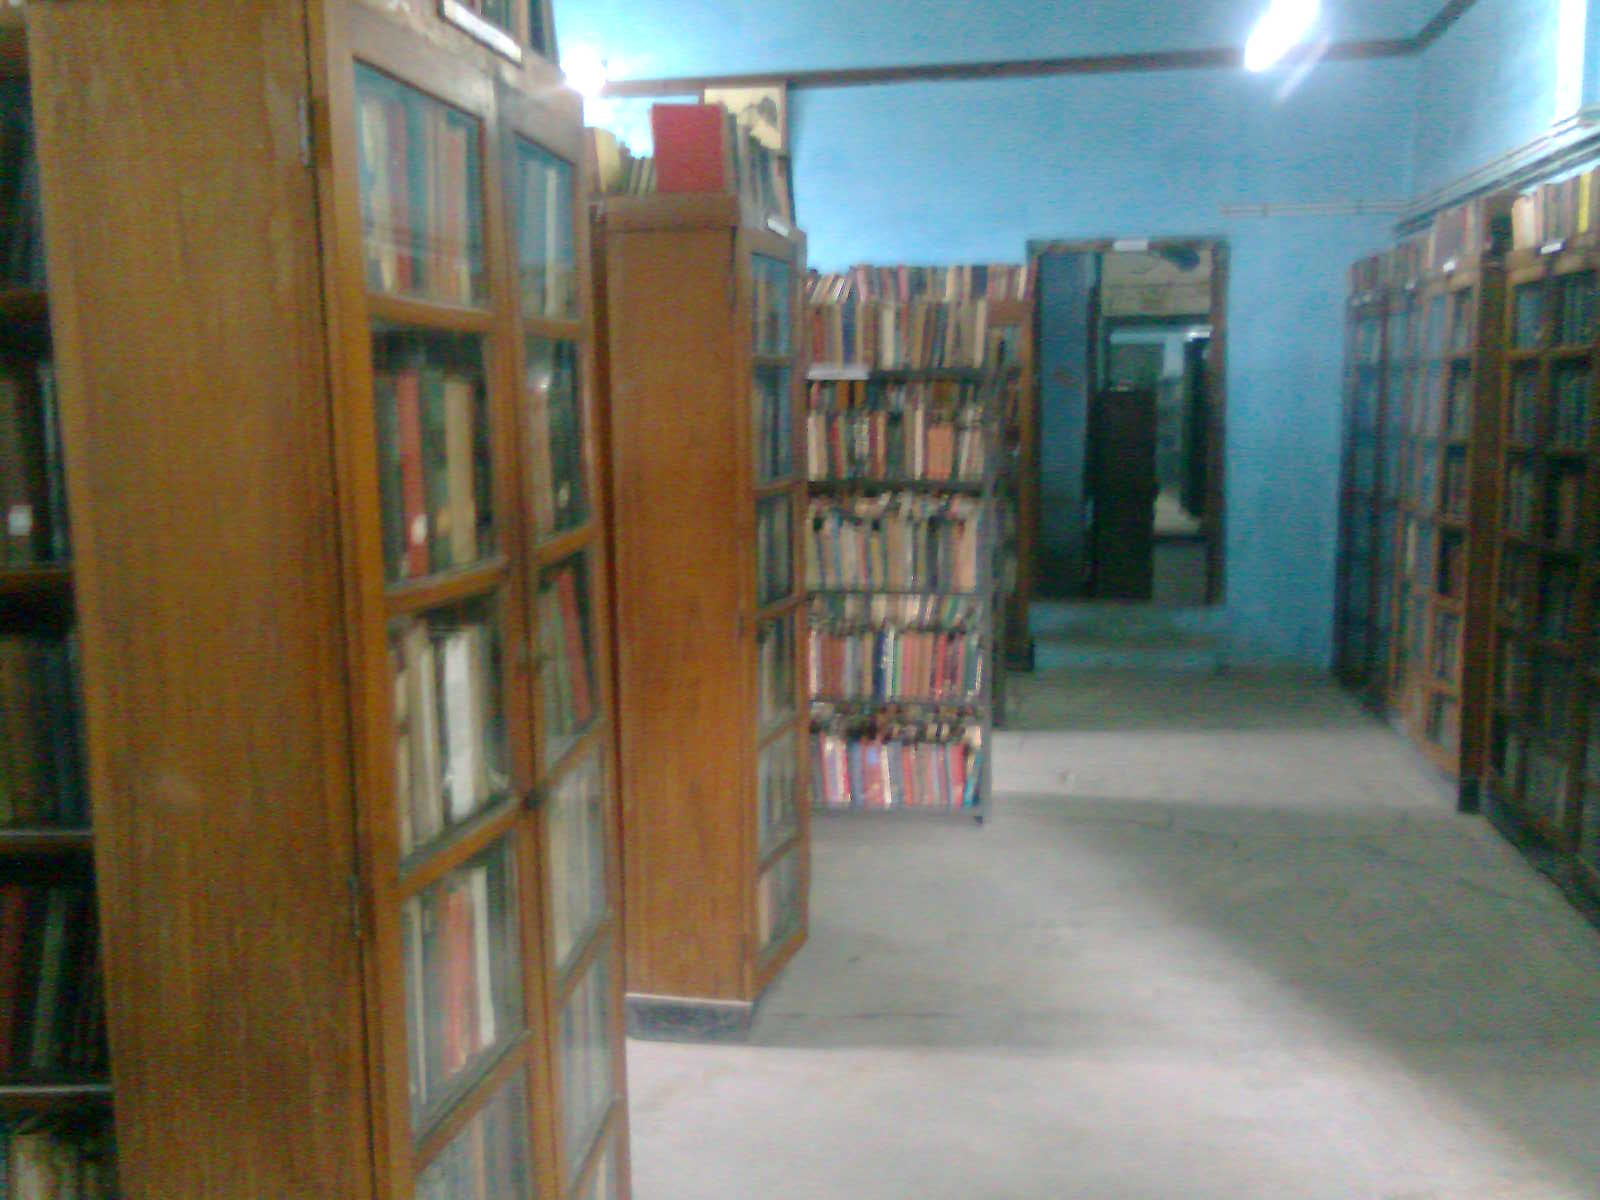 Central State Library, Solan (HP)